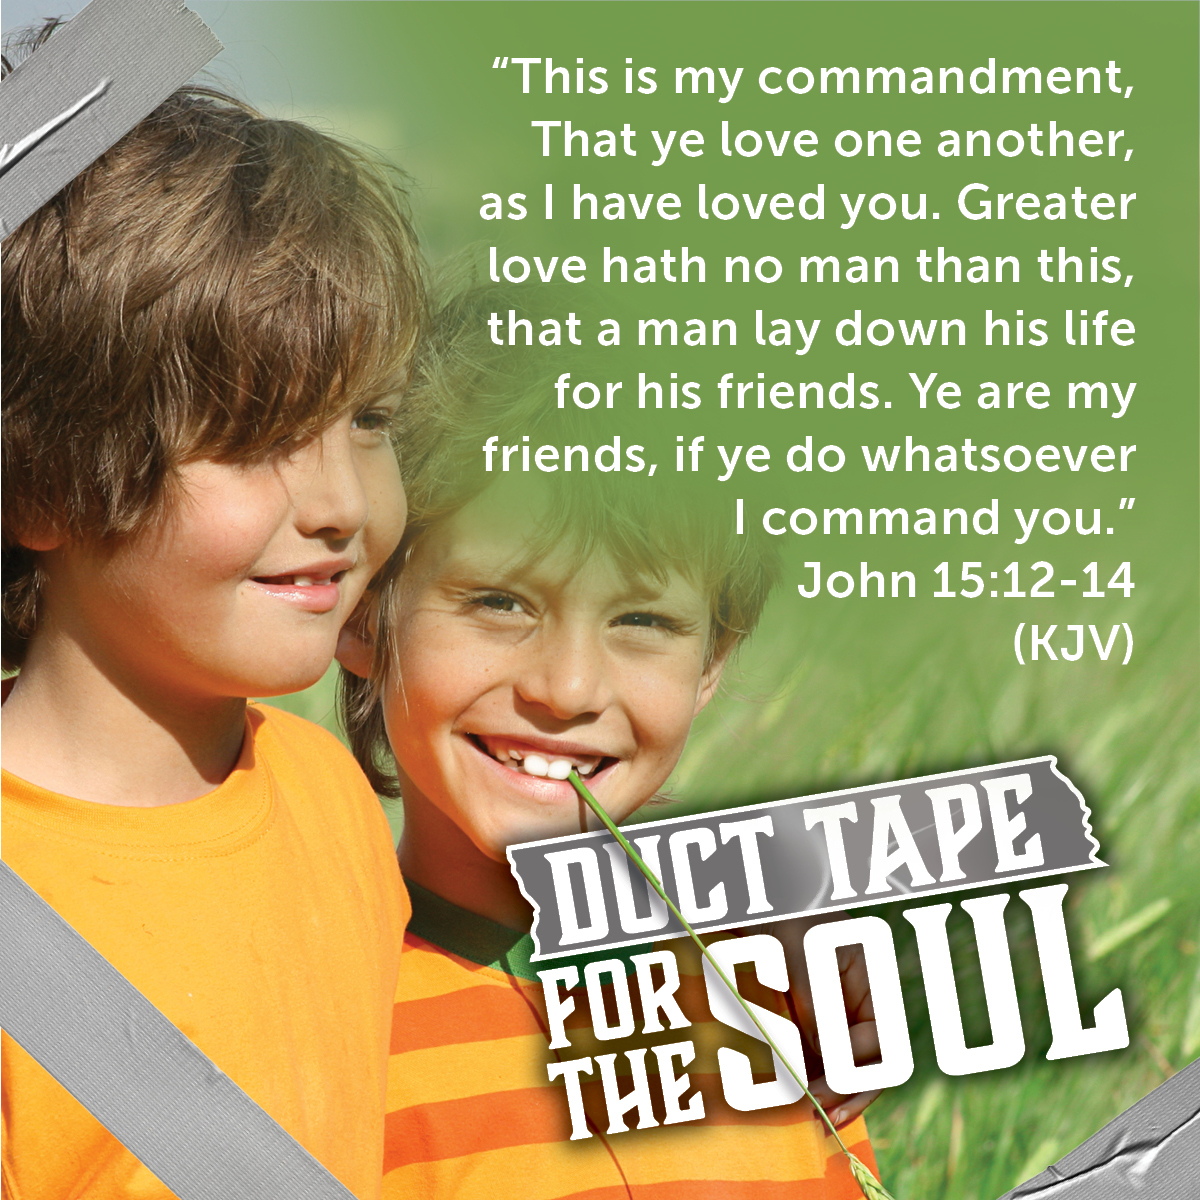 Who is Jesus to you? - March Duct Tape for the Soul